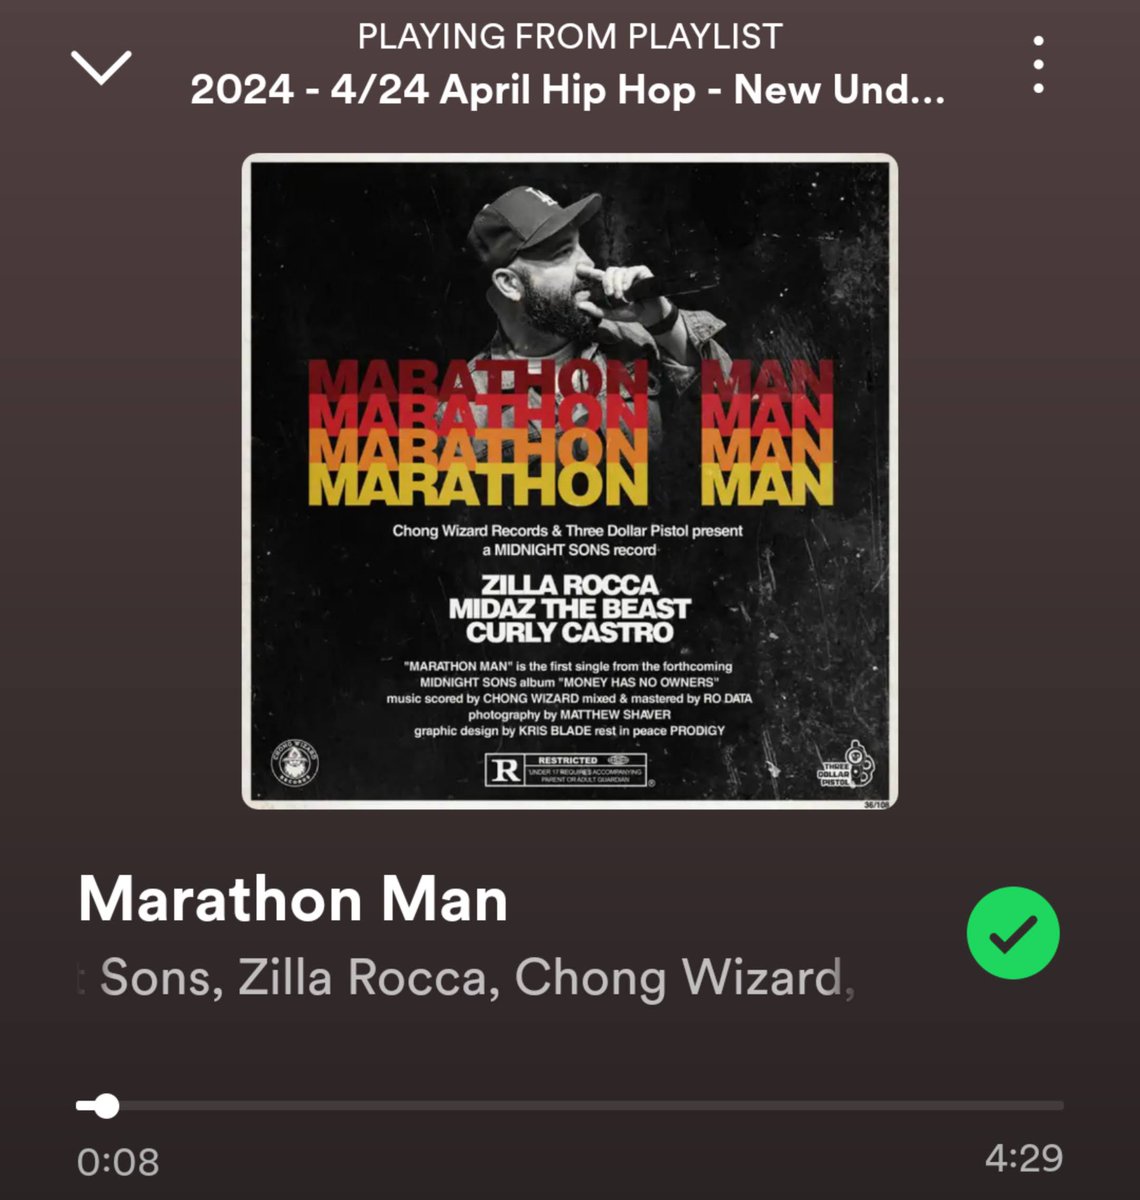 'Marathon Man' by Midnight Sons, Zilla Rocca, Chong Wizard, Curly Castro & Midaz The Beast is 1 of the 🔥 tracks on #THHM's April 2024 Spotify playlist 'New Underground Classic Rap' #NowPlaying #HipHop #HipHopHistory #TheHipHopMuseum Listen & Follow: open.spotify.com/playlist/39Bj6…